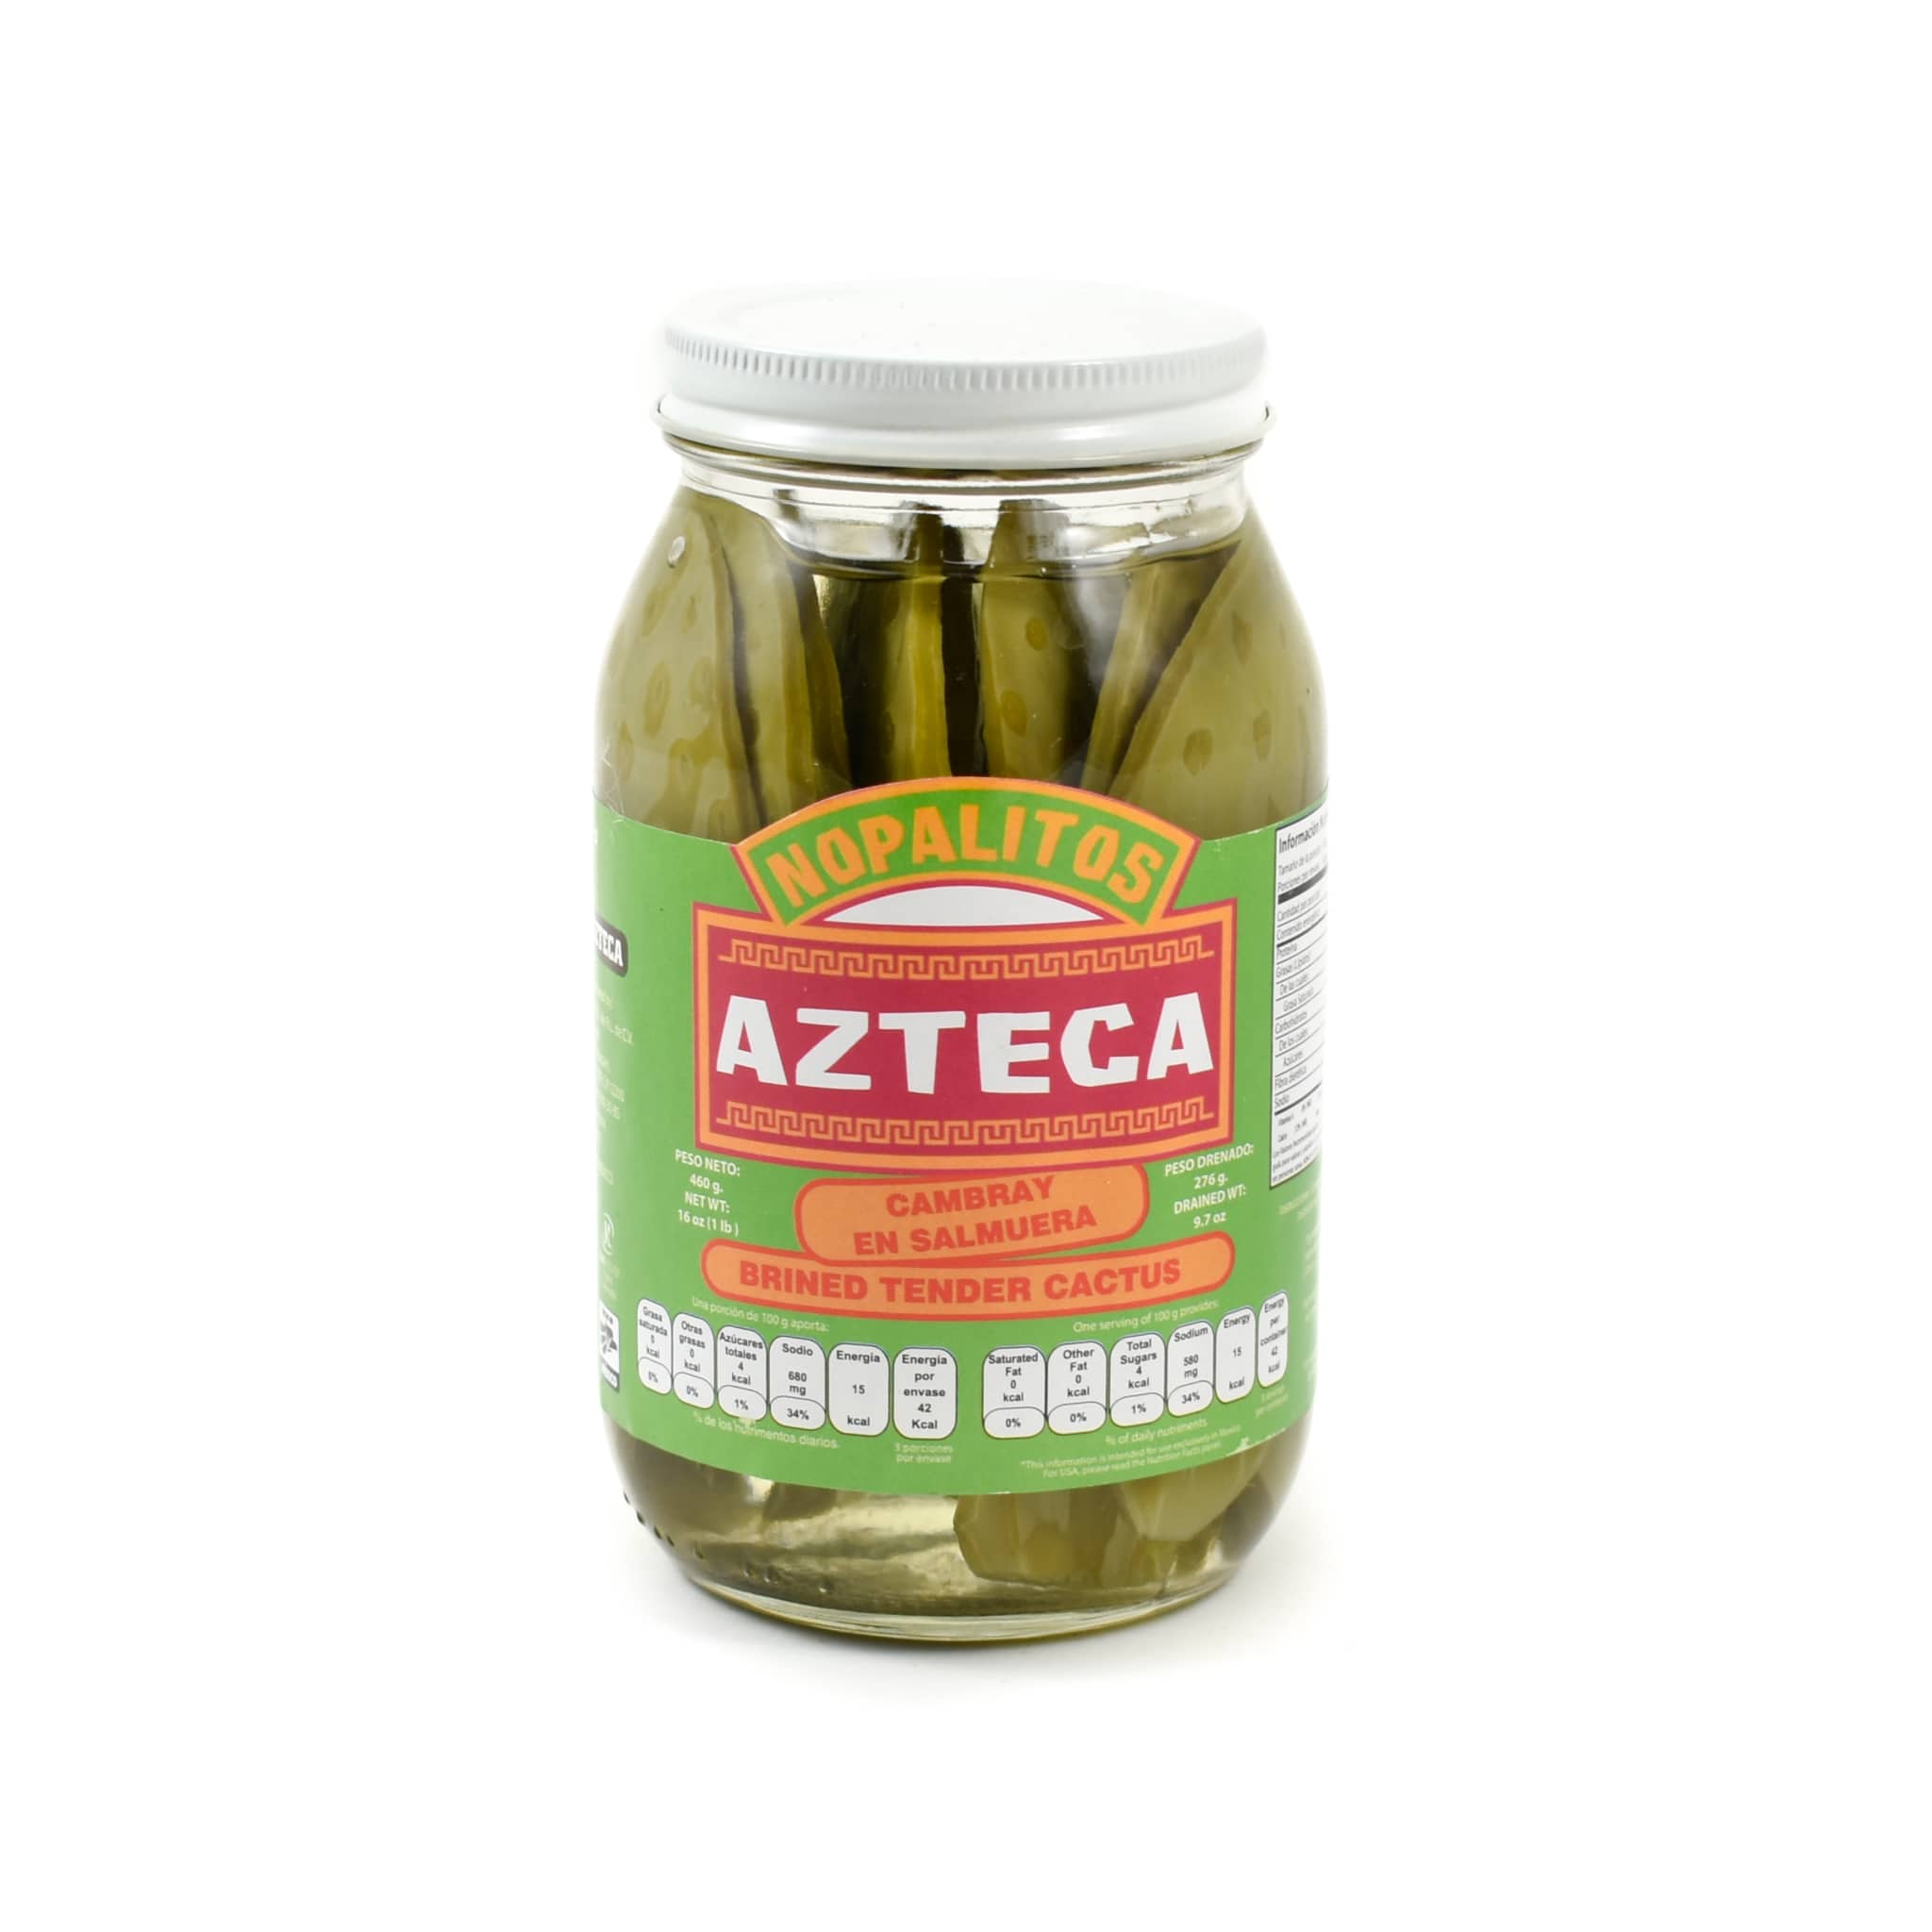 Azteca Cambray Whole Cactus Leaves 460g Mexican Food and Cooking